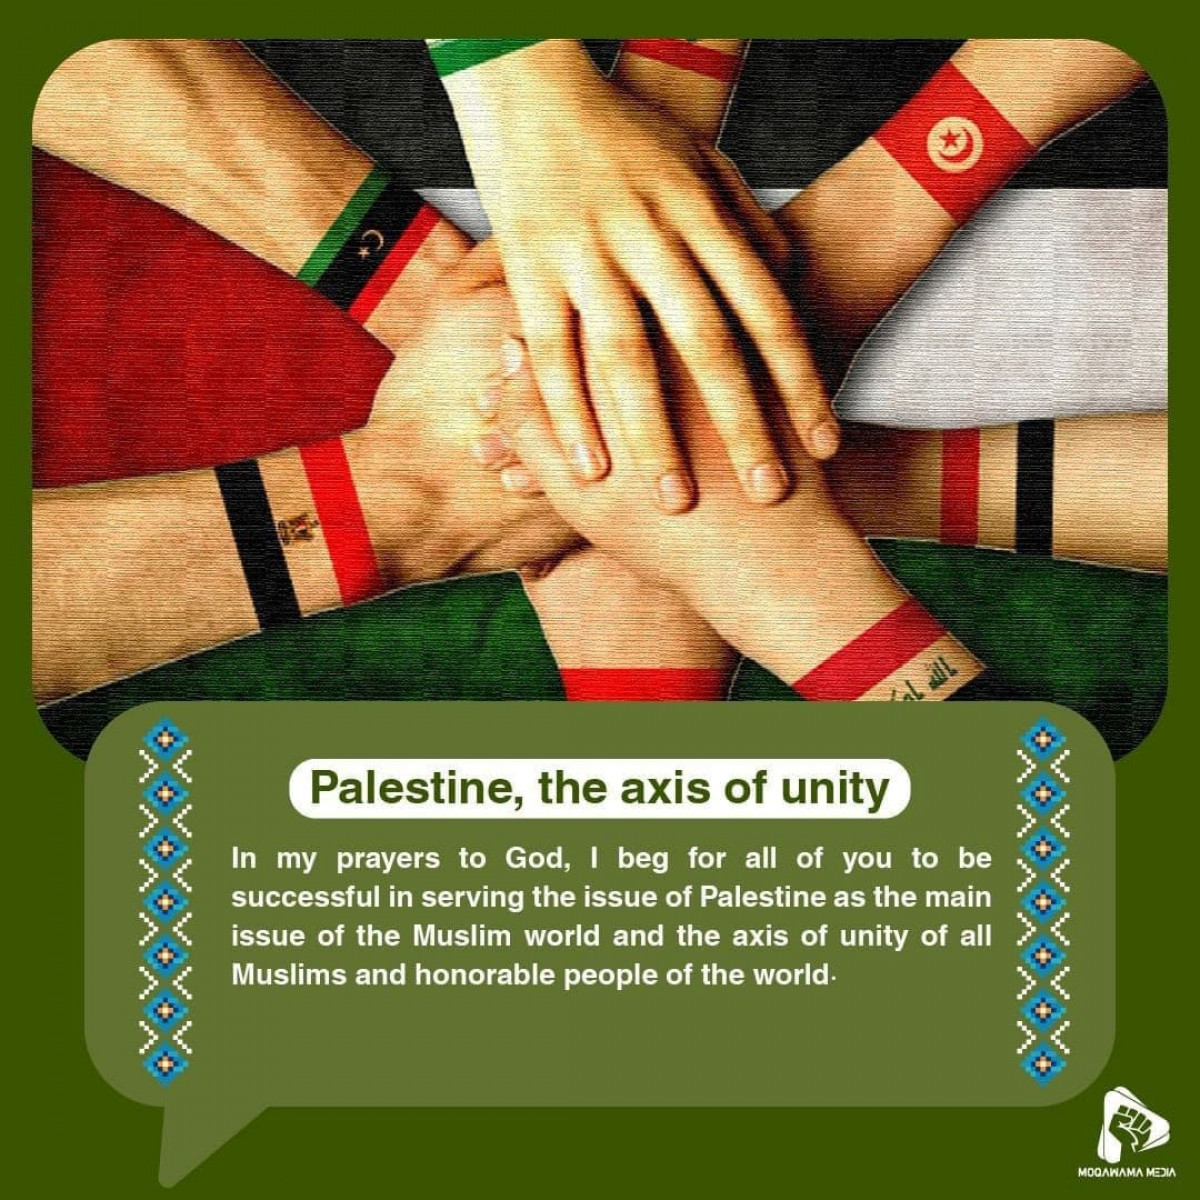 Palestine, the axis of unity